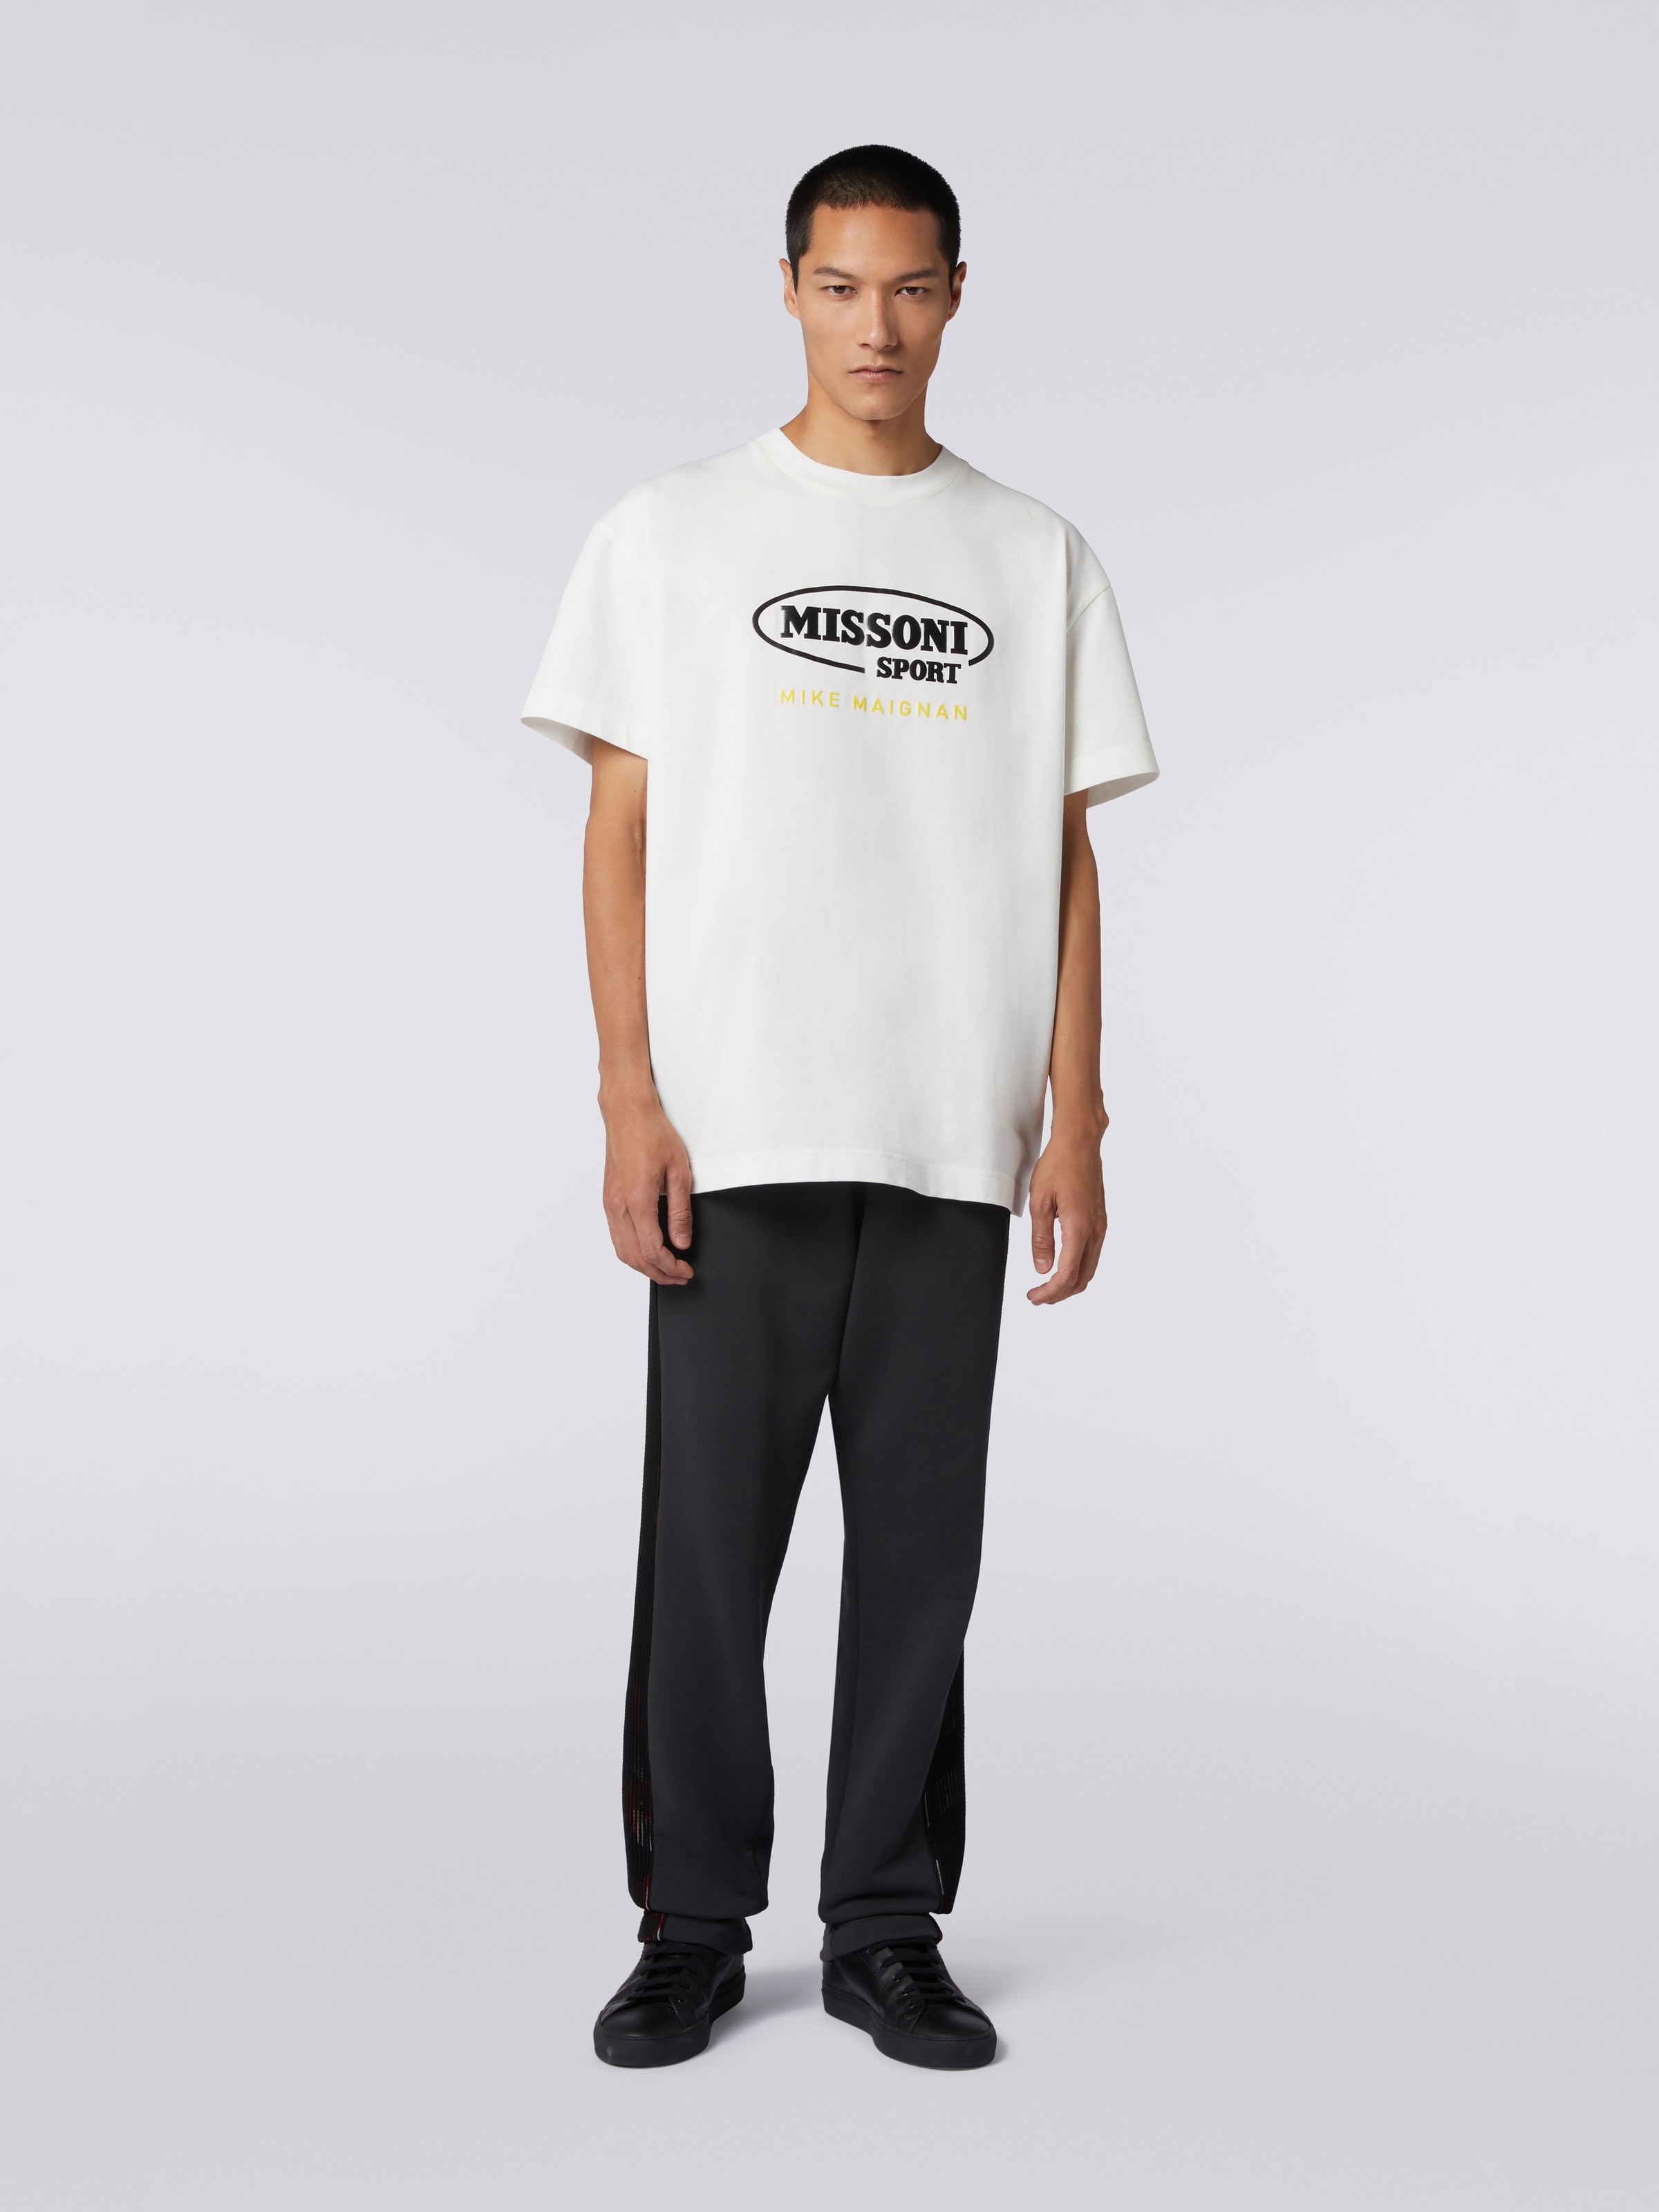 Crew-neck cotton T-shirt with logo in collaboration with Mike Maignan, White - 1